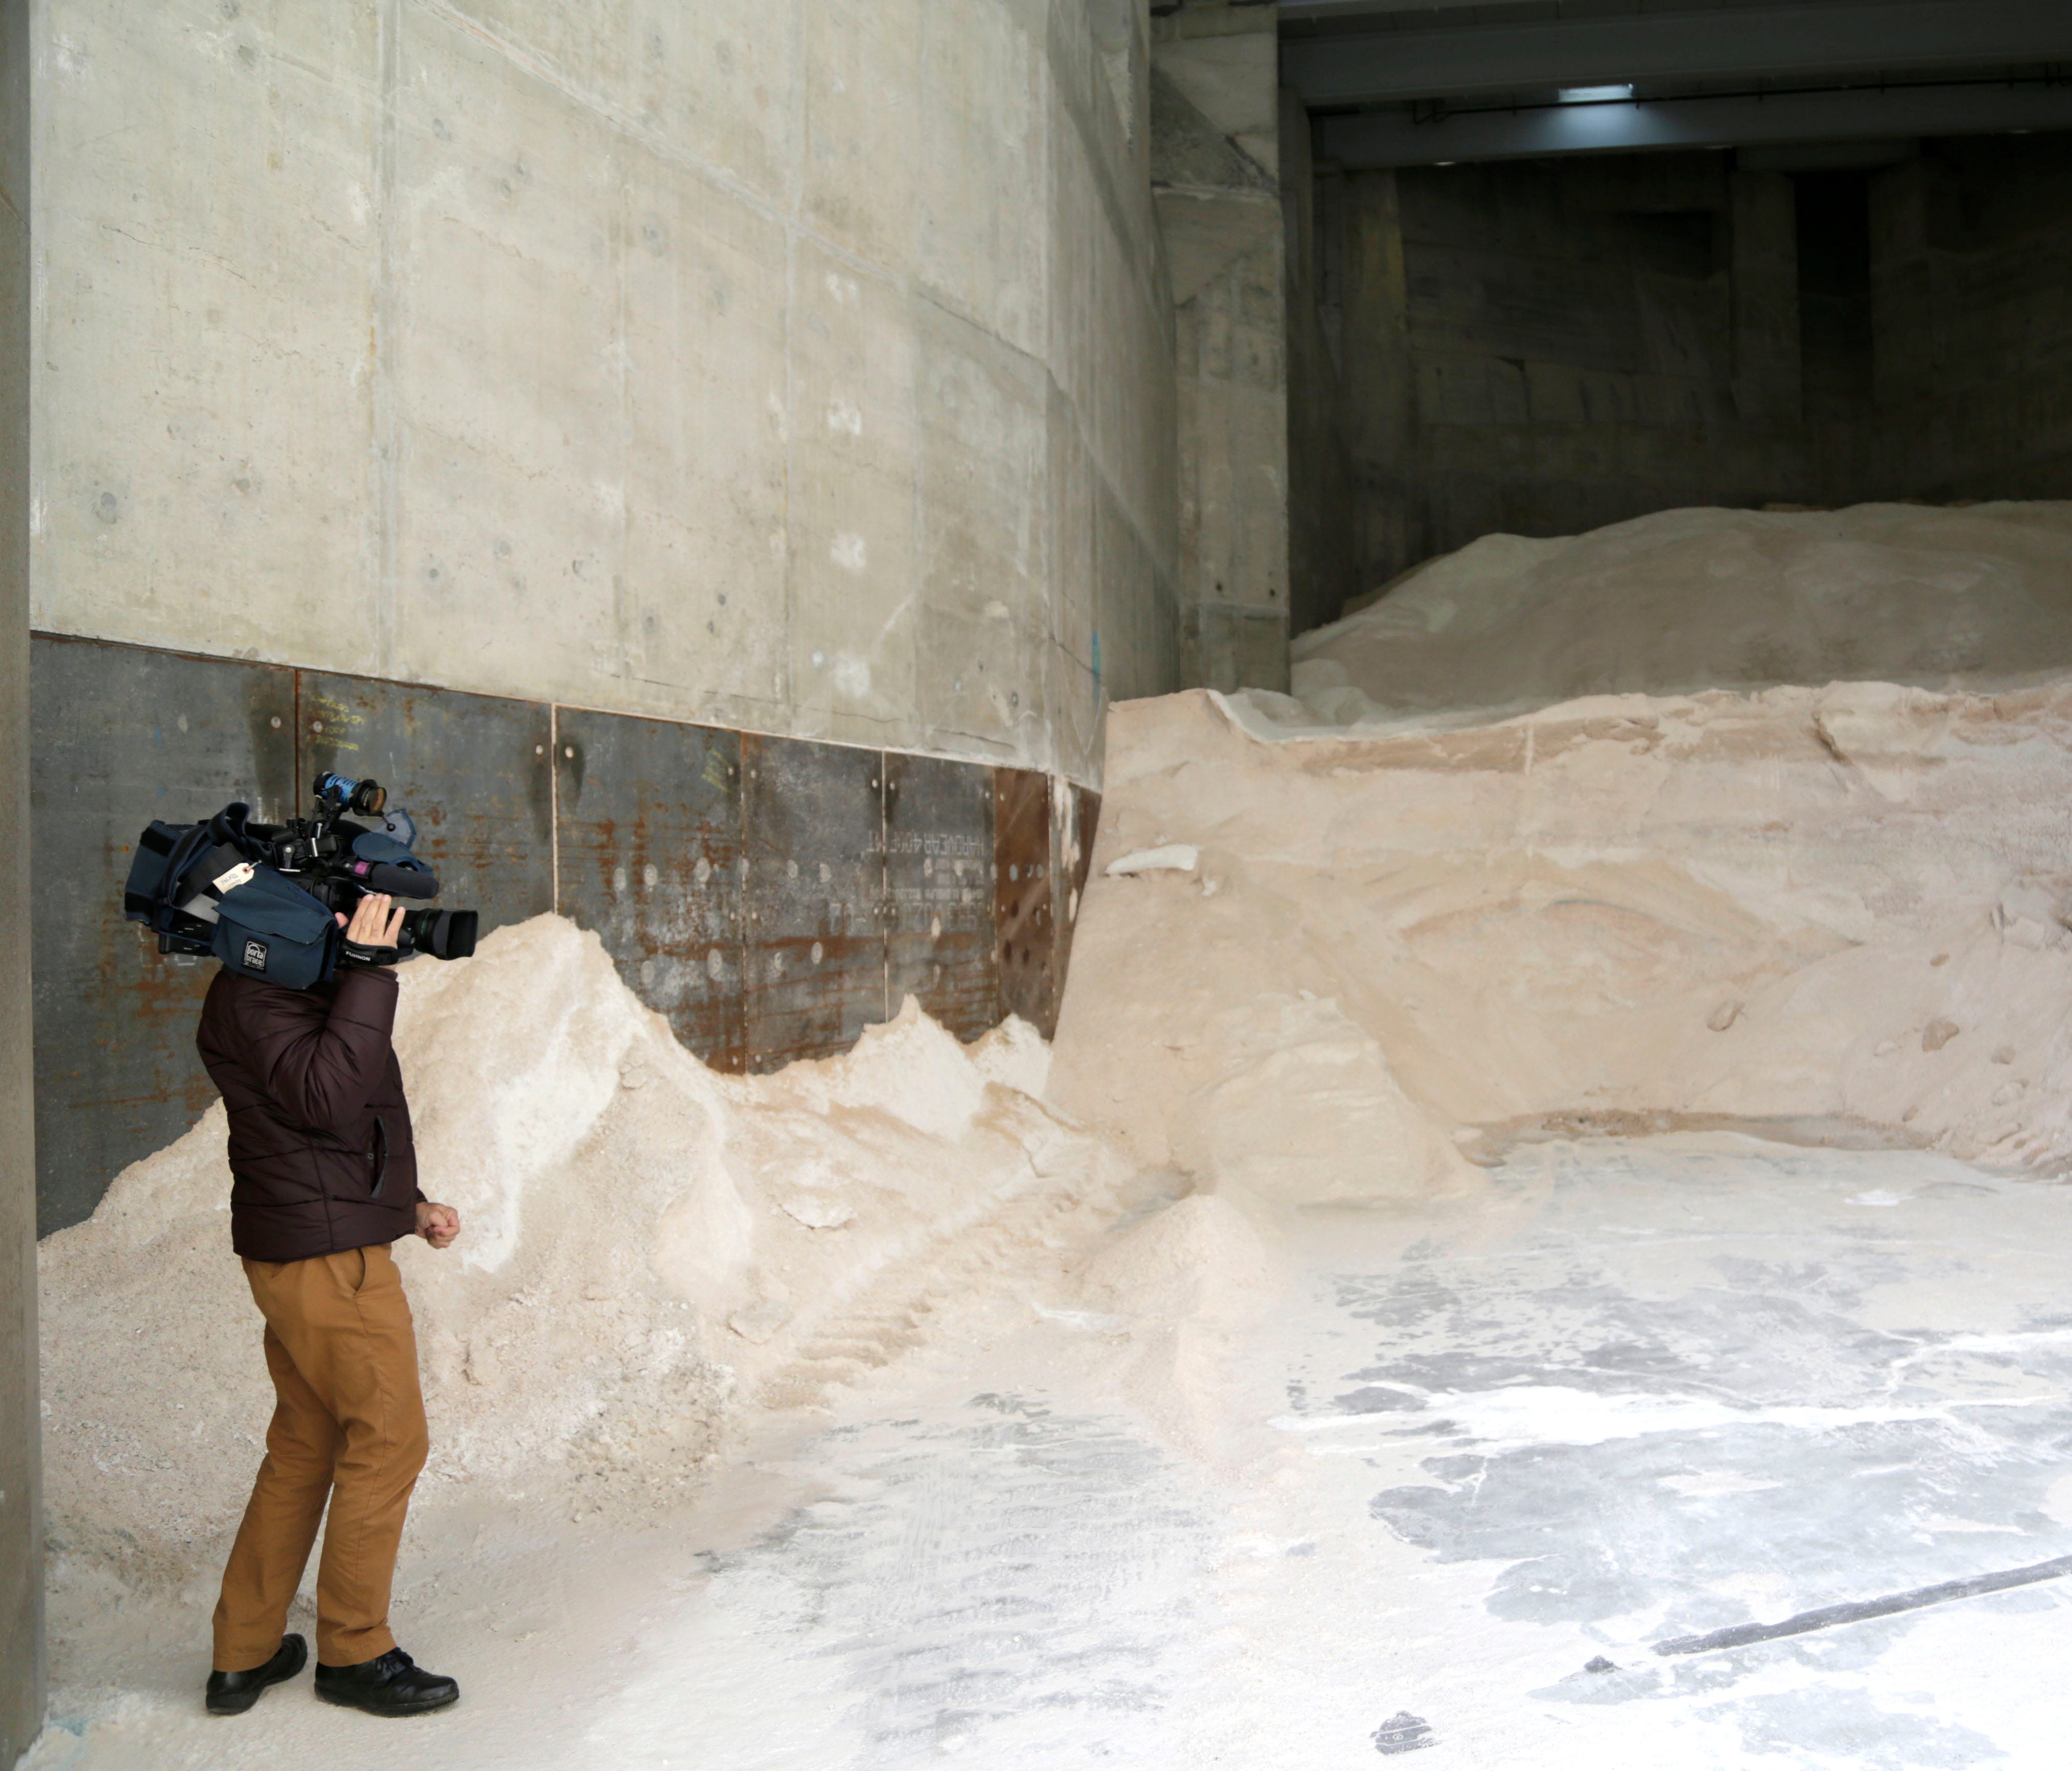 A reporter films salt that is ready for use on the streets in New York as the area prepares for Stella March 12, 2017.